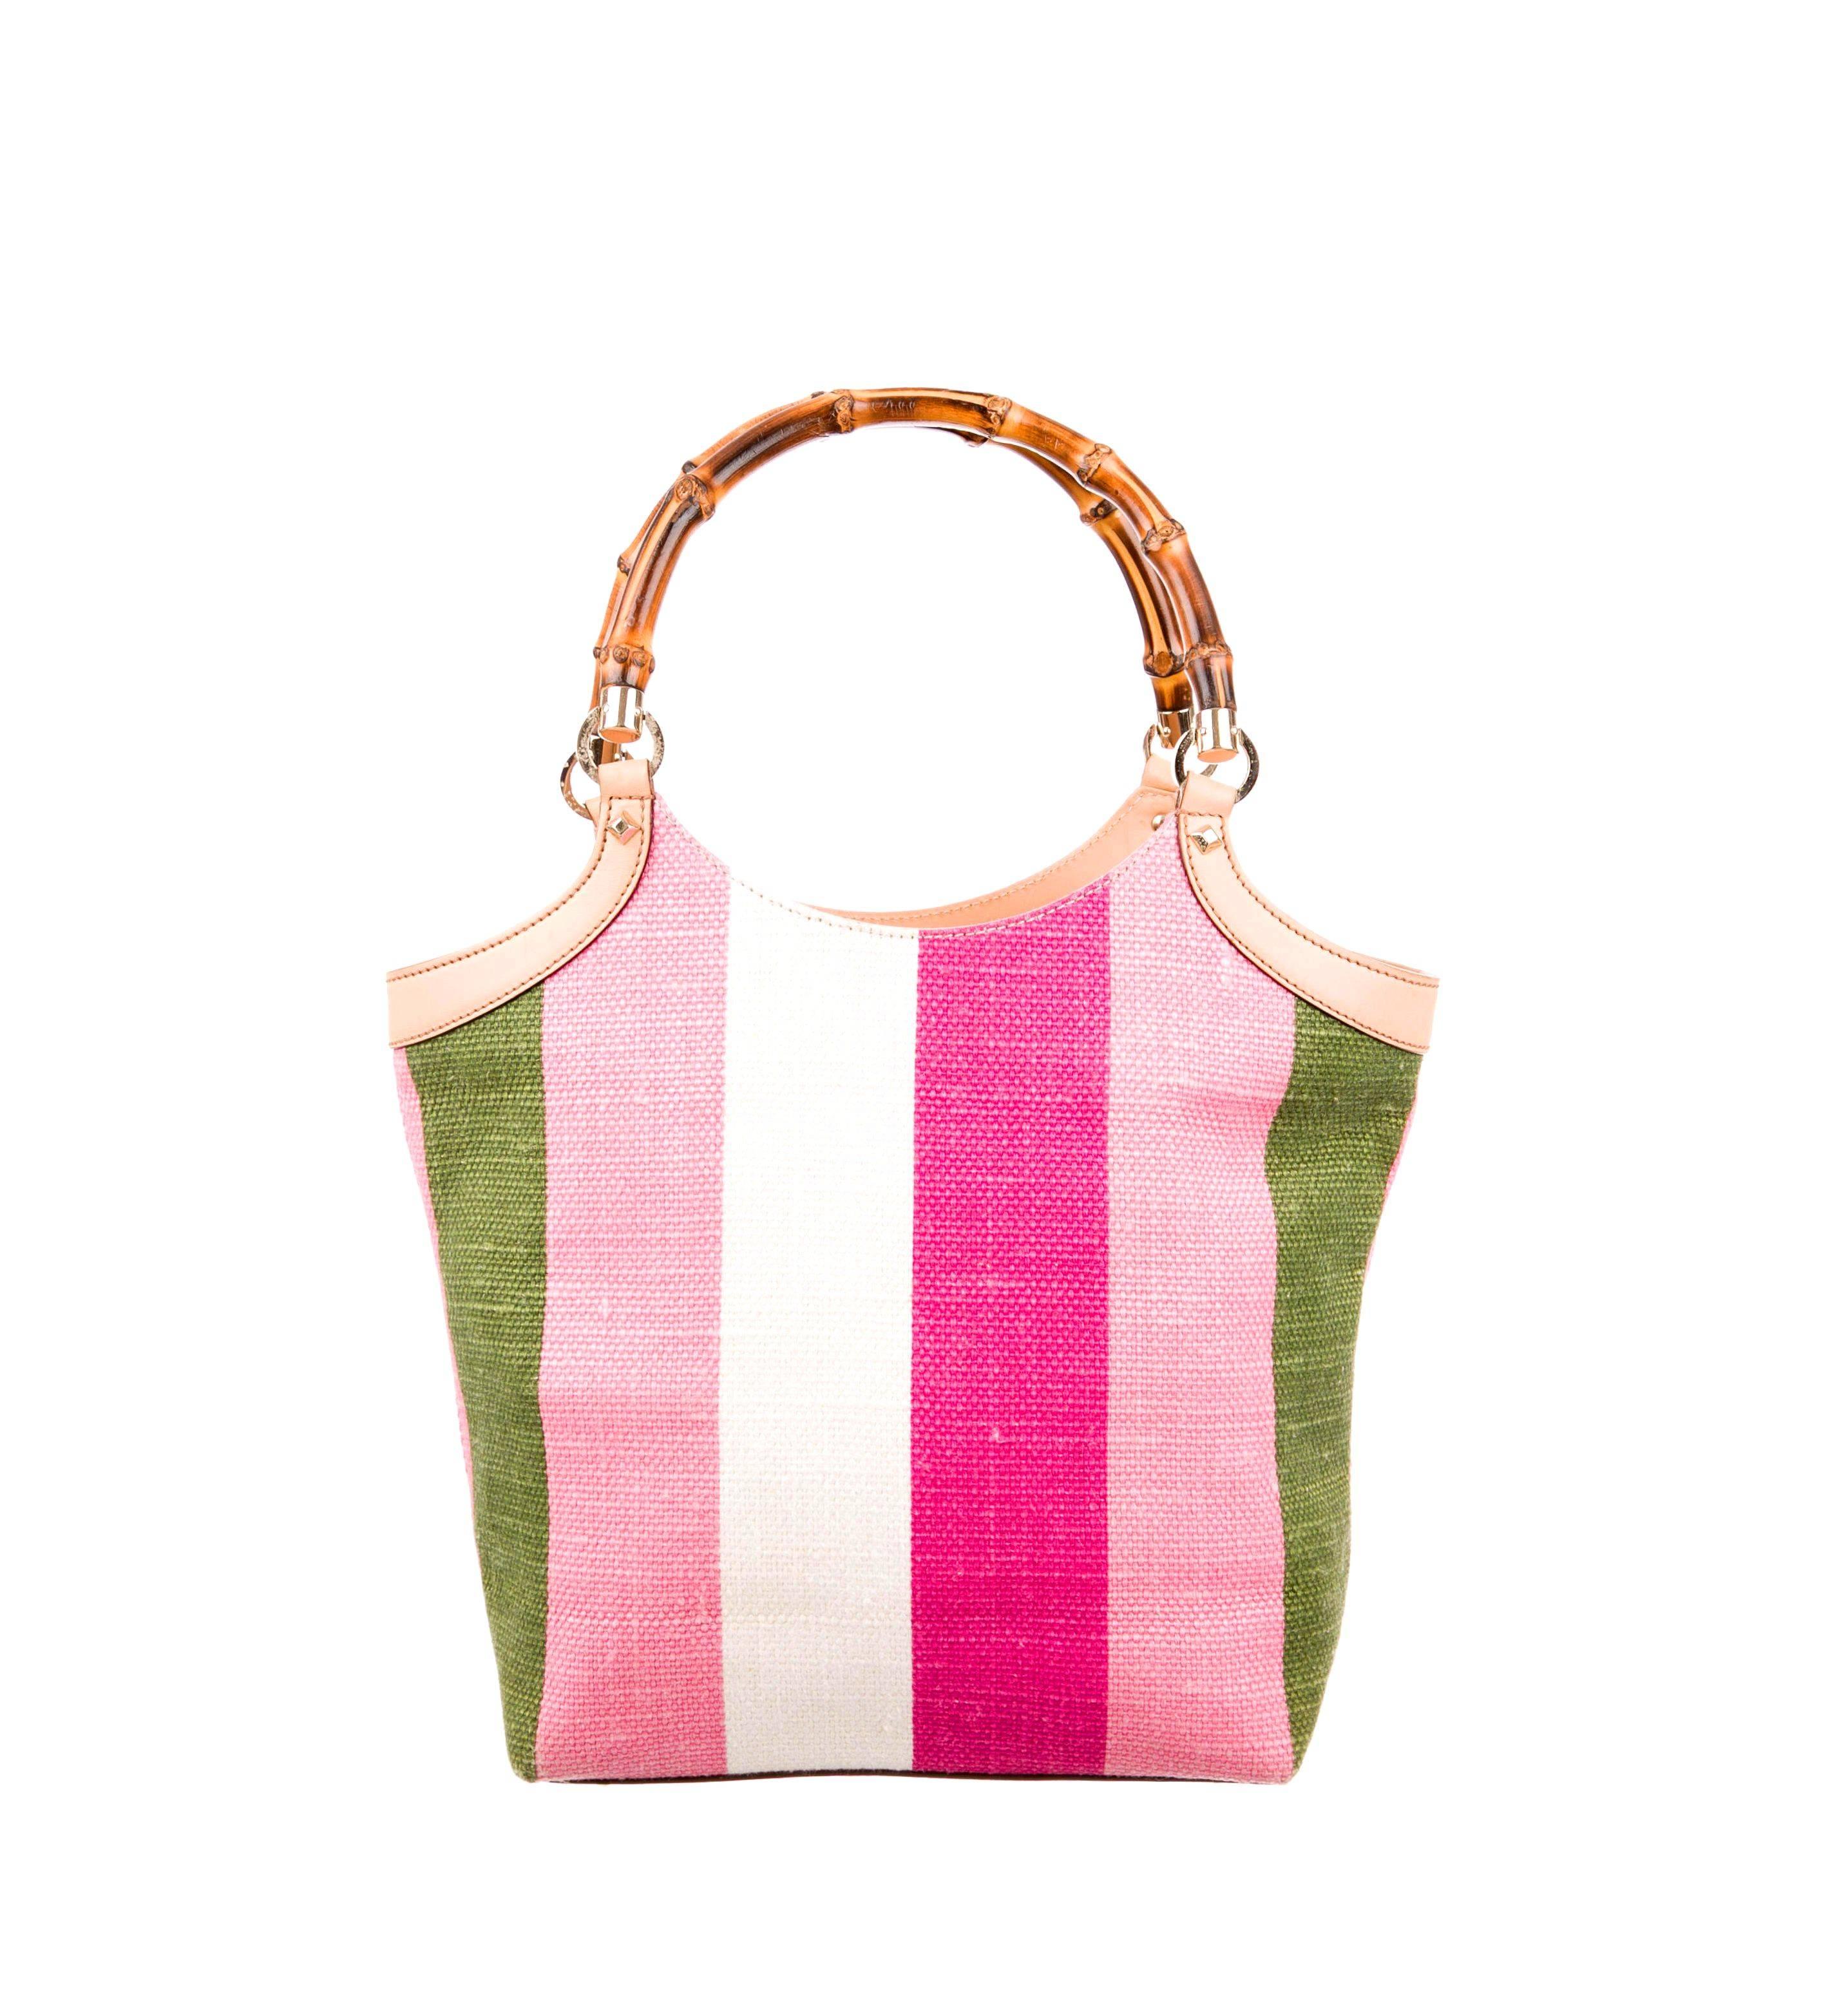 
Gucci's famous baiadera fabric is brought back from the House's archives with a washed effect.

Beautiful GUCCI canvas striped tote
Baiadera striped canvas collection
A true GUCCI statement piece
Natural leather trimming
Light-gold colored